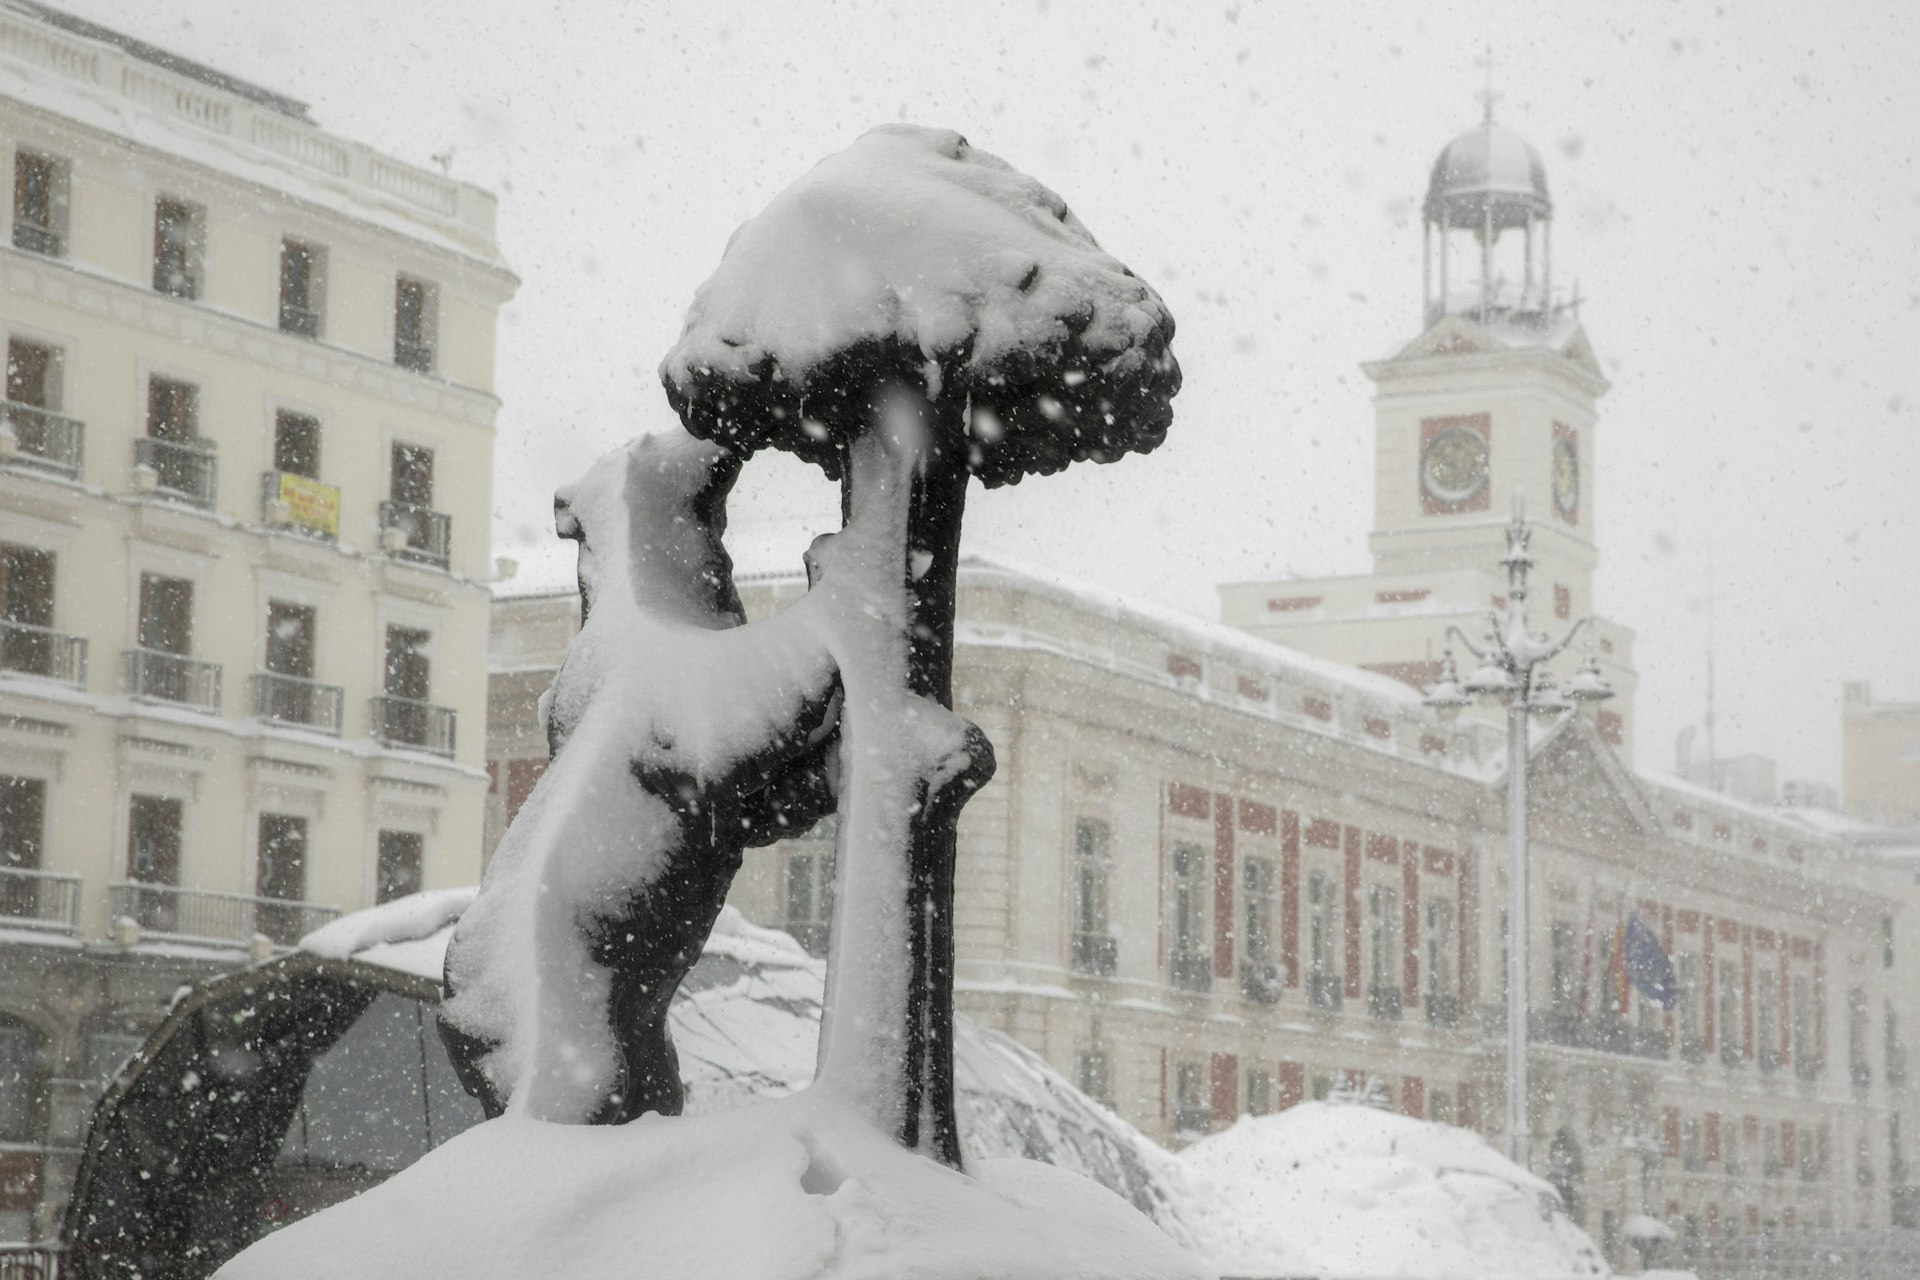 A picture of the famous bear sculpture in Puerta del Sol covered by snow